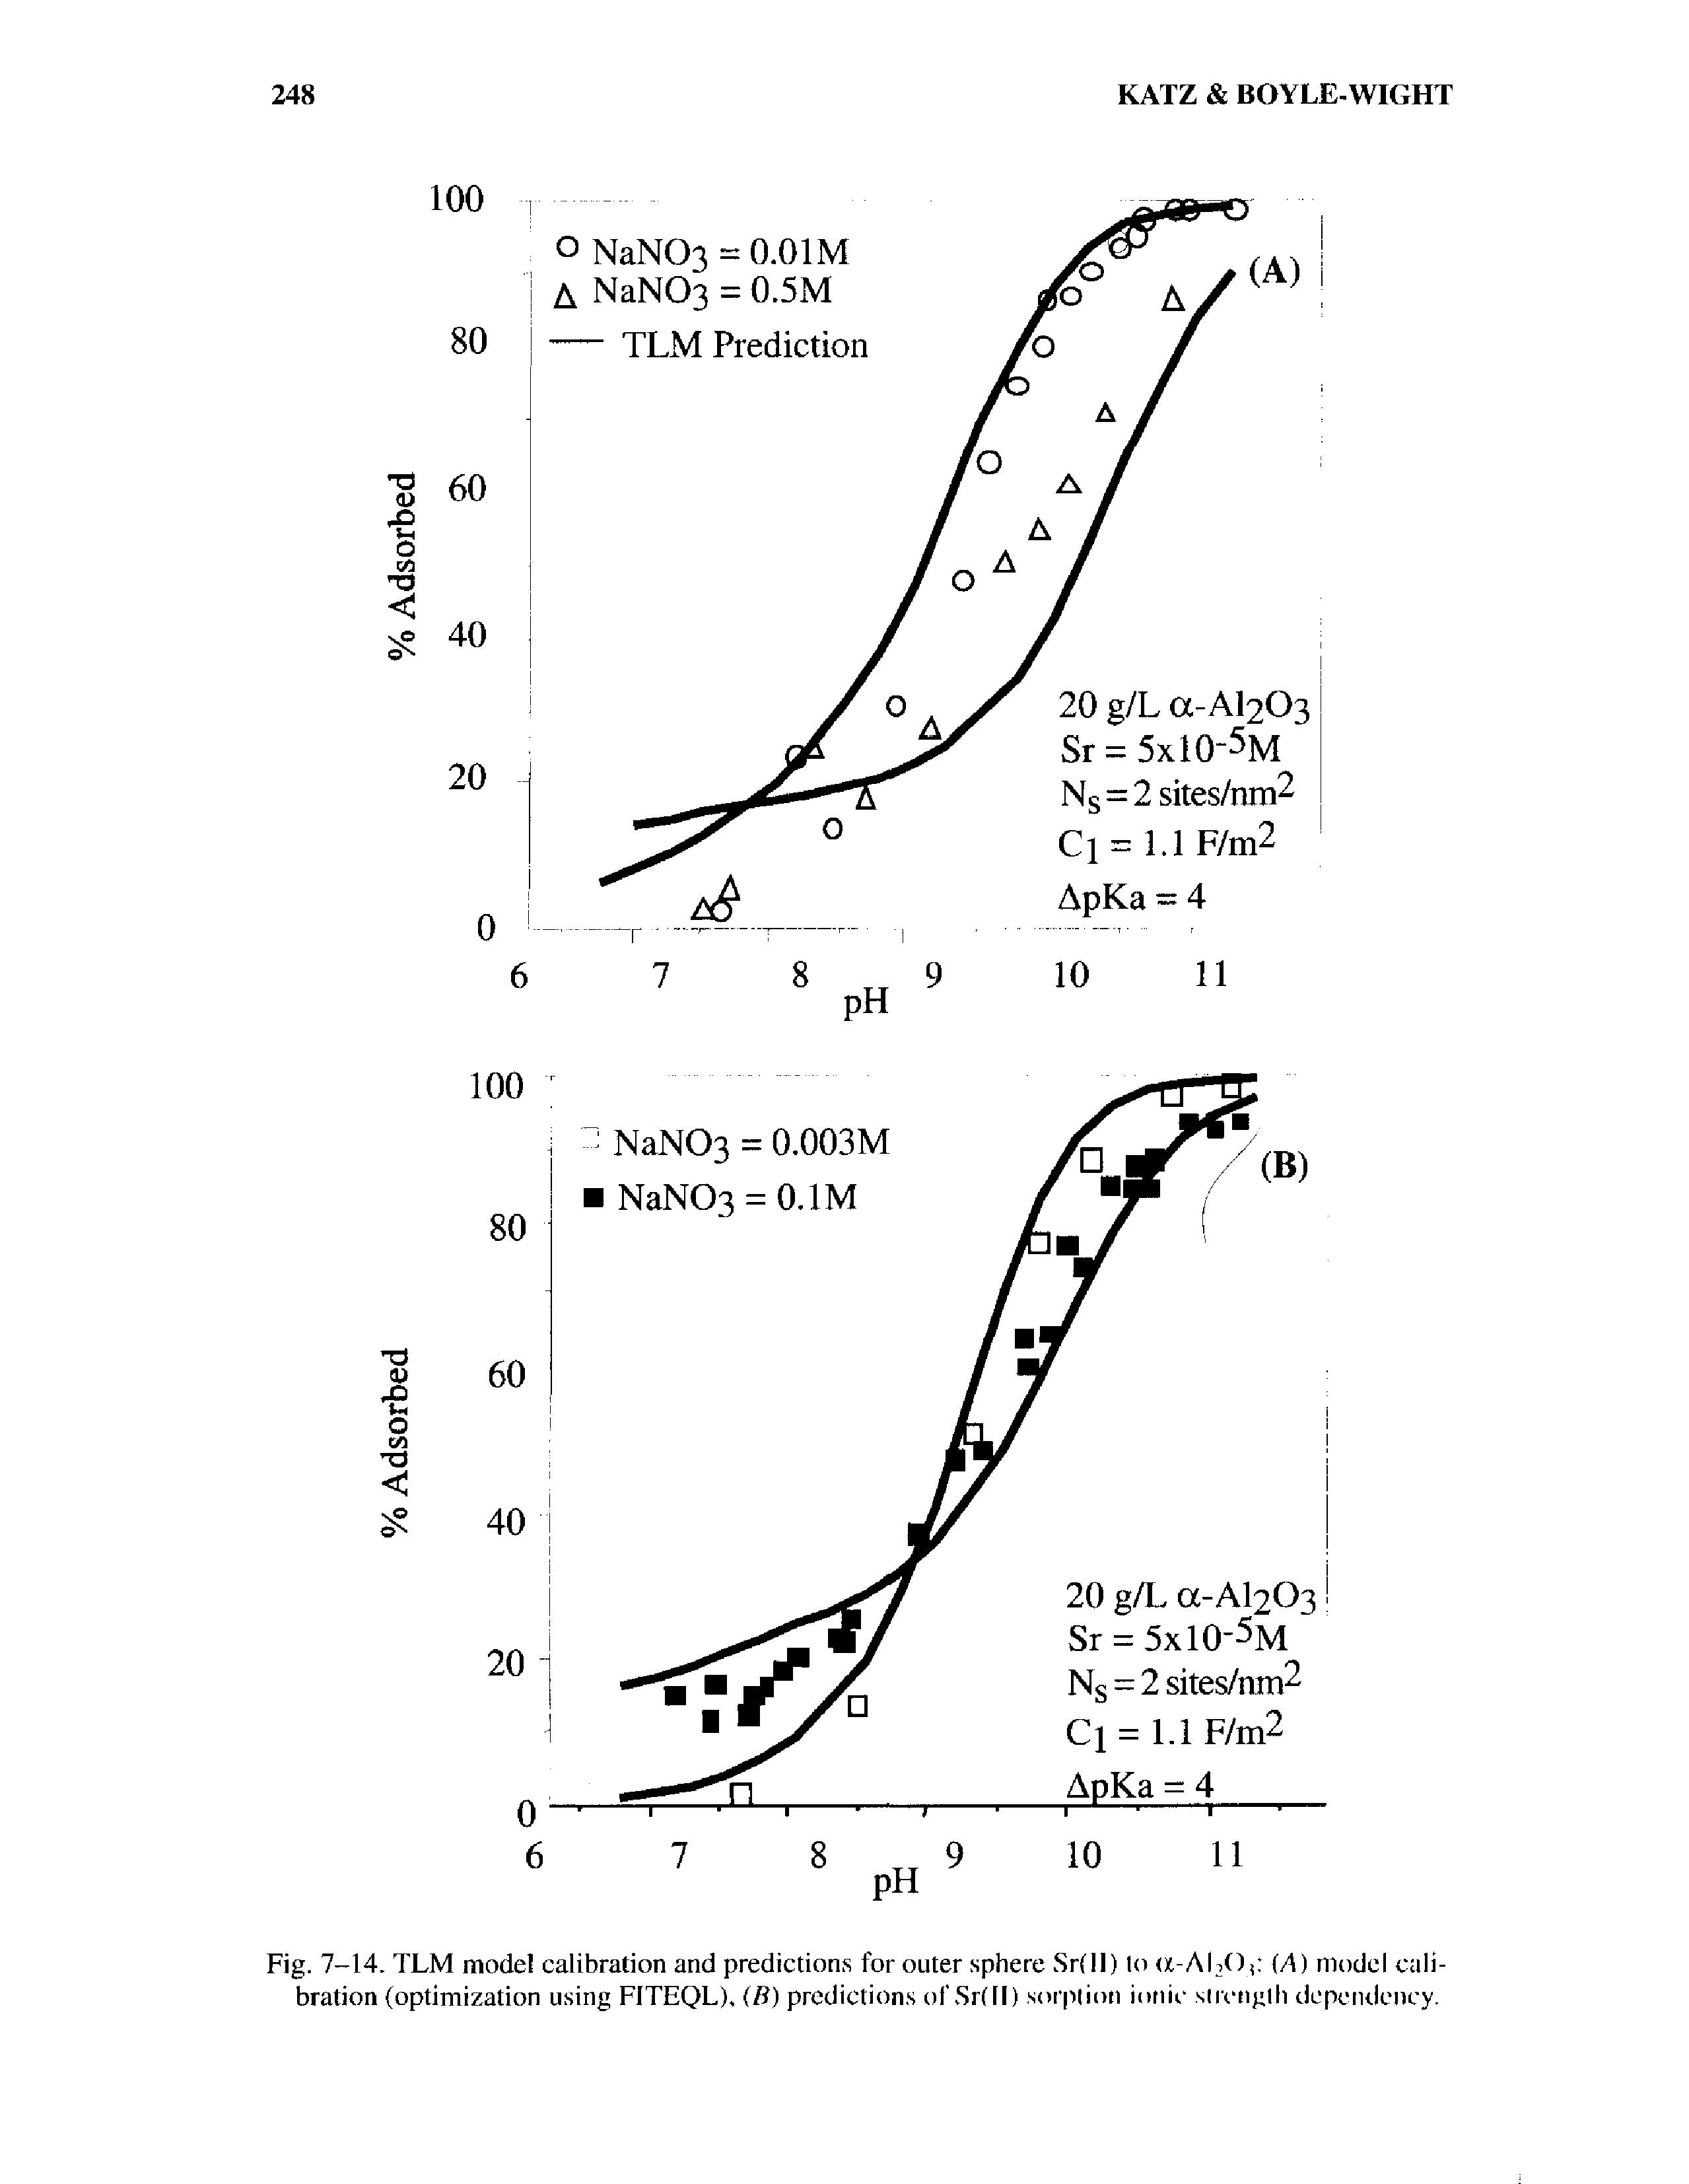 Fig. 7-14. TLM model calibration and predictions for outer sphere Sr(ll) to ot-ALOp (A) model calibration (optimization using FITEQL), (B) predictions of Sr(ll) sorption ionic strength dependency.